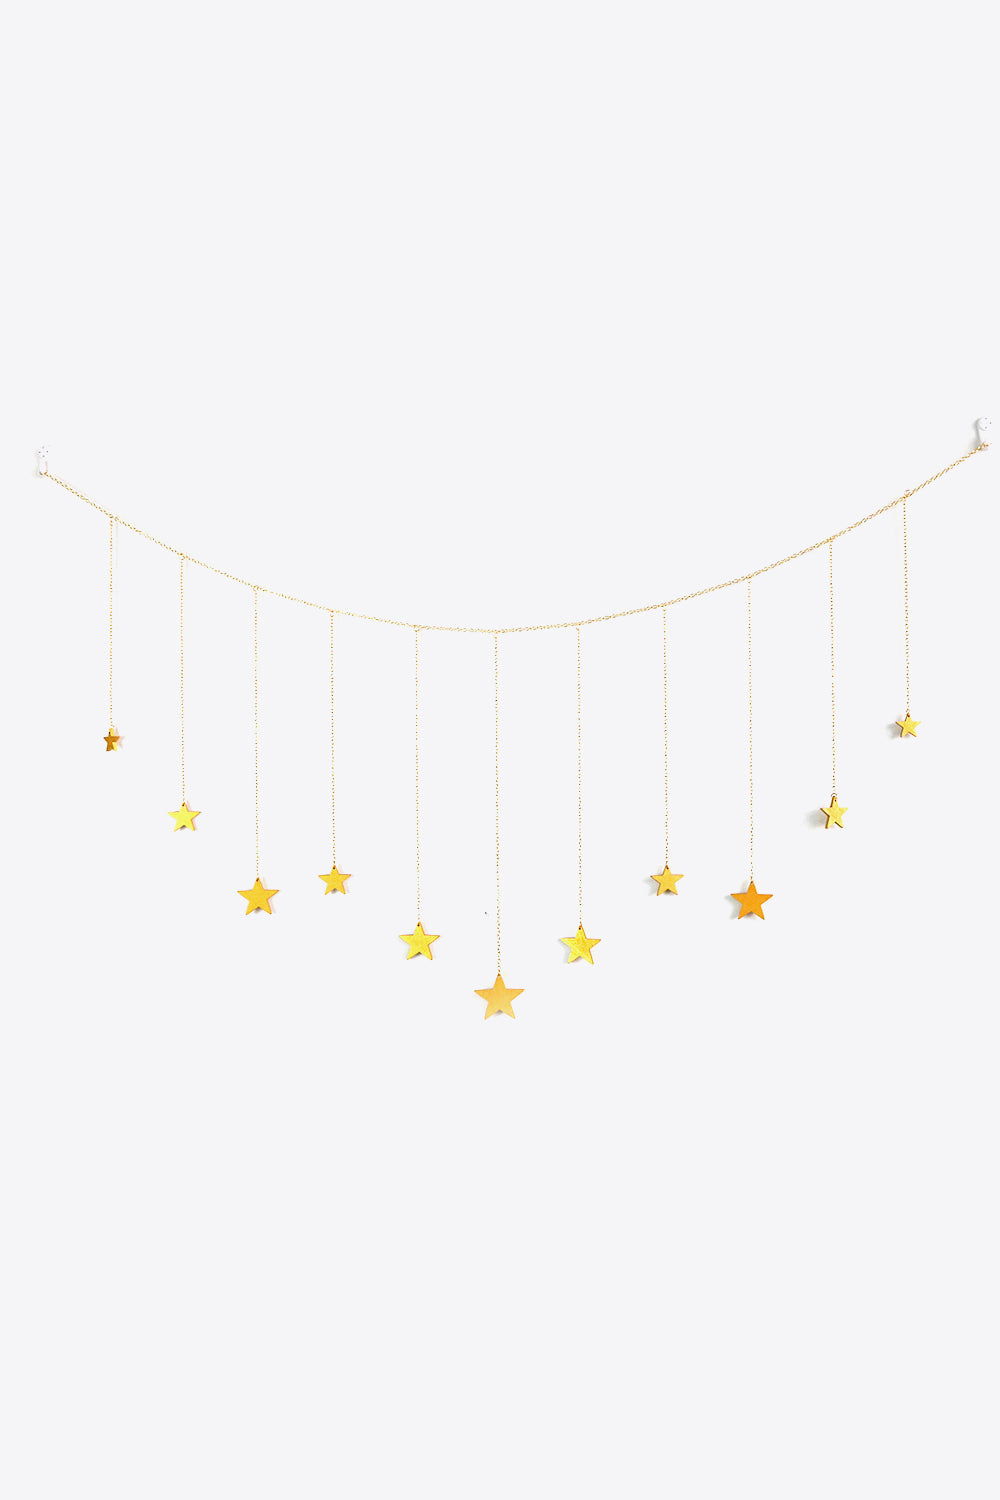 Moon Star Wall Hanging | 3 Styles |